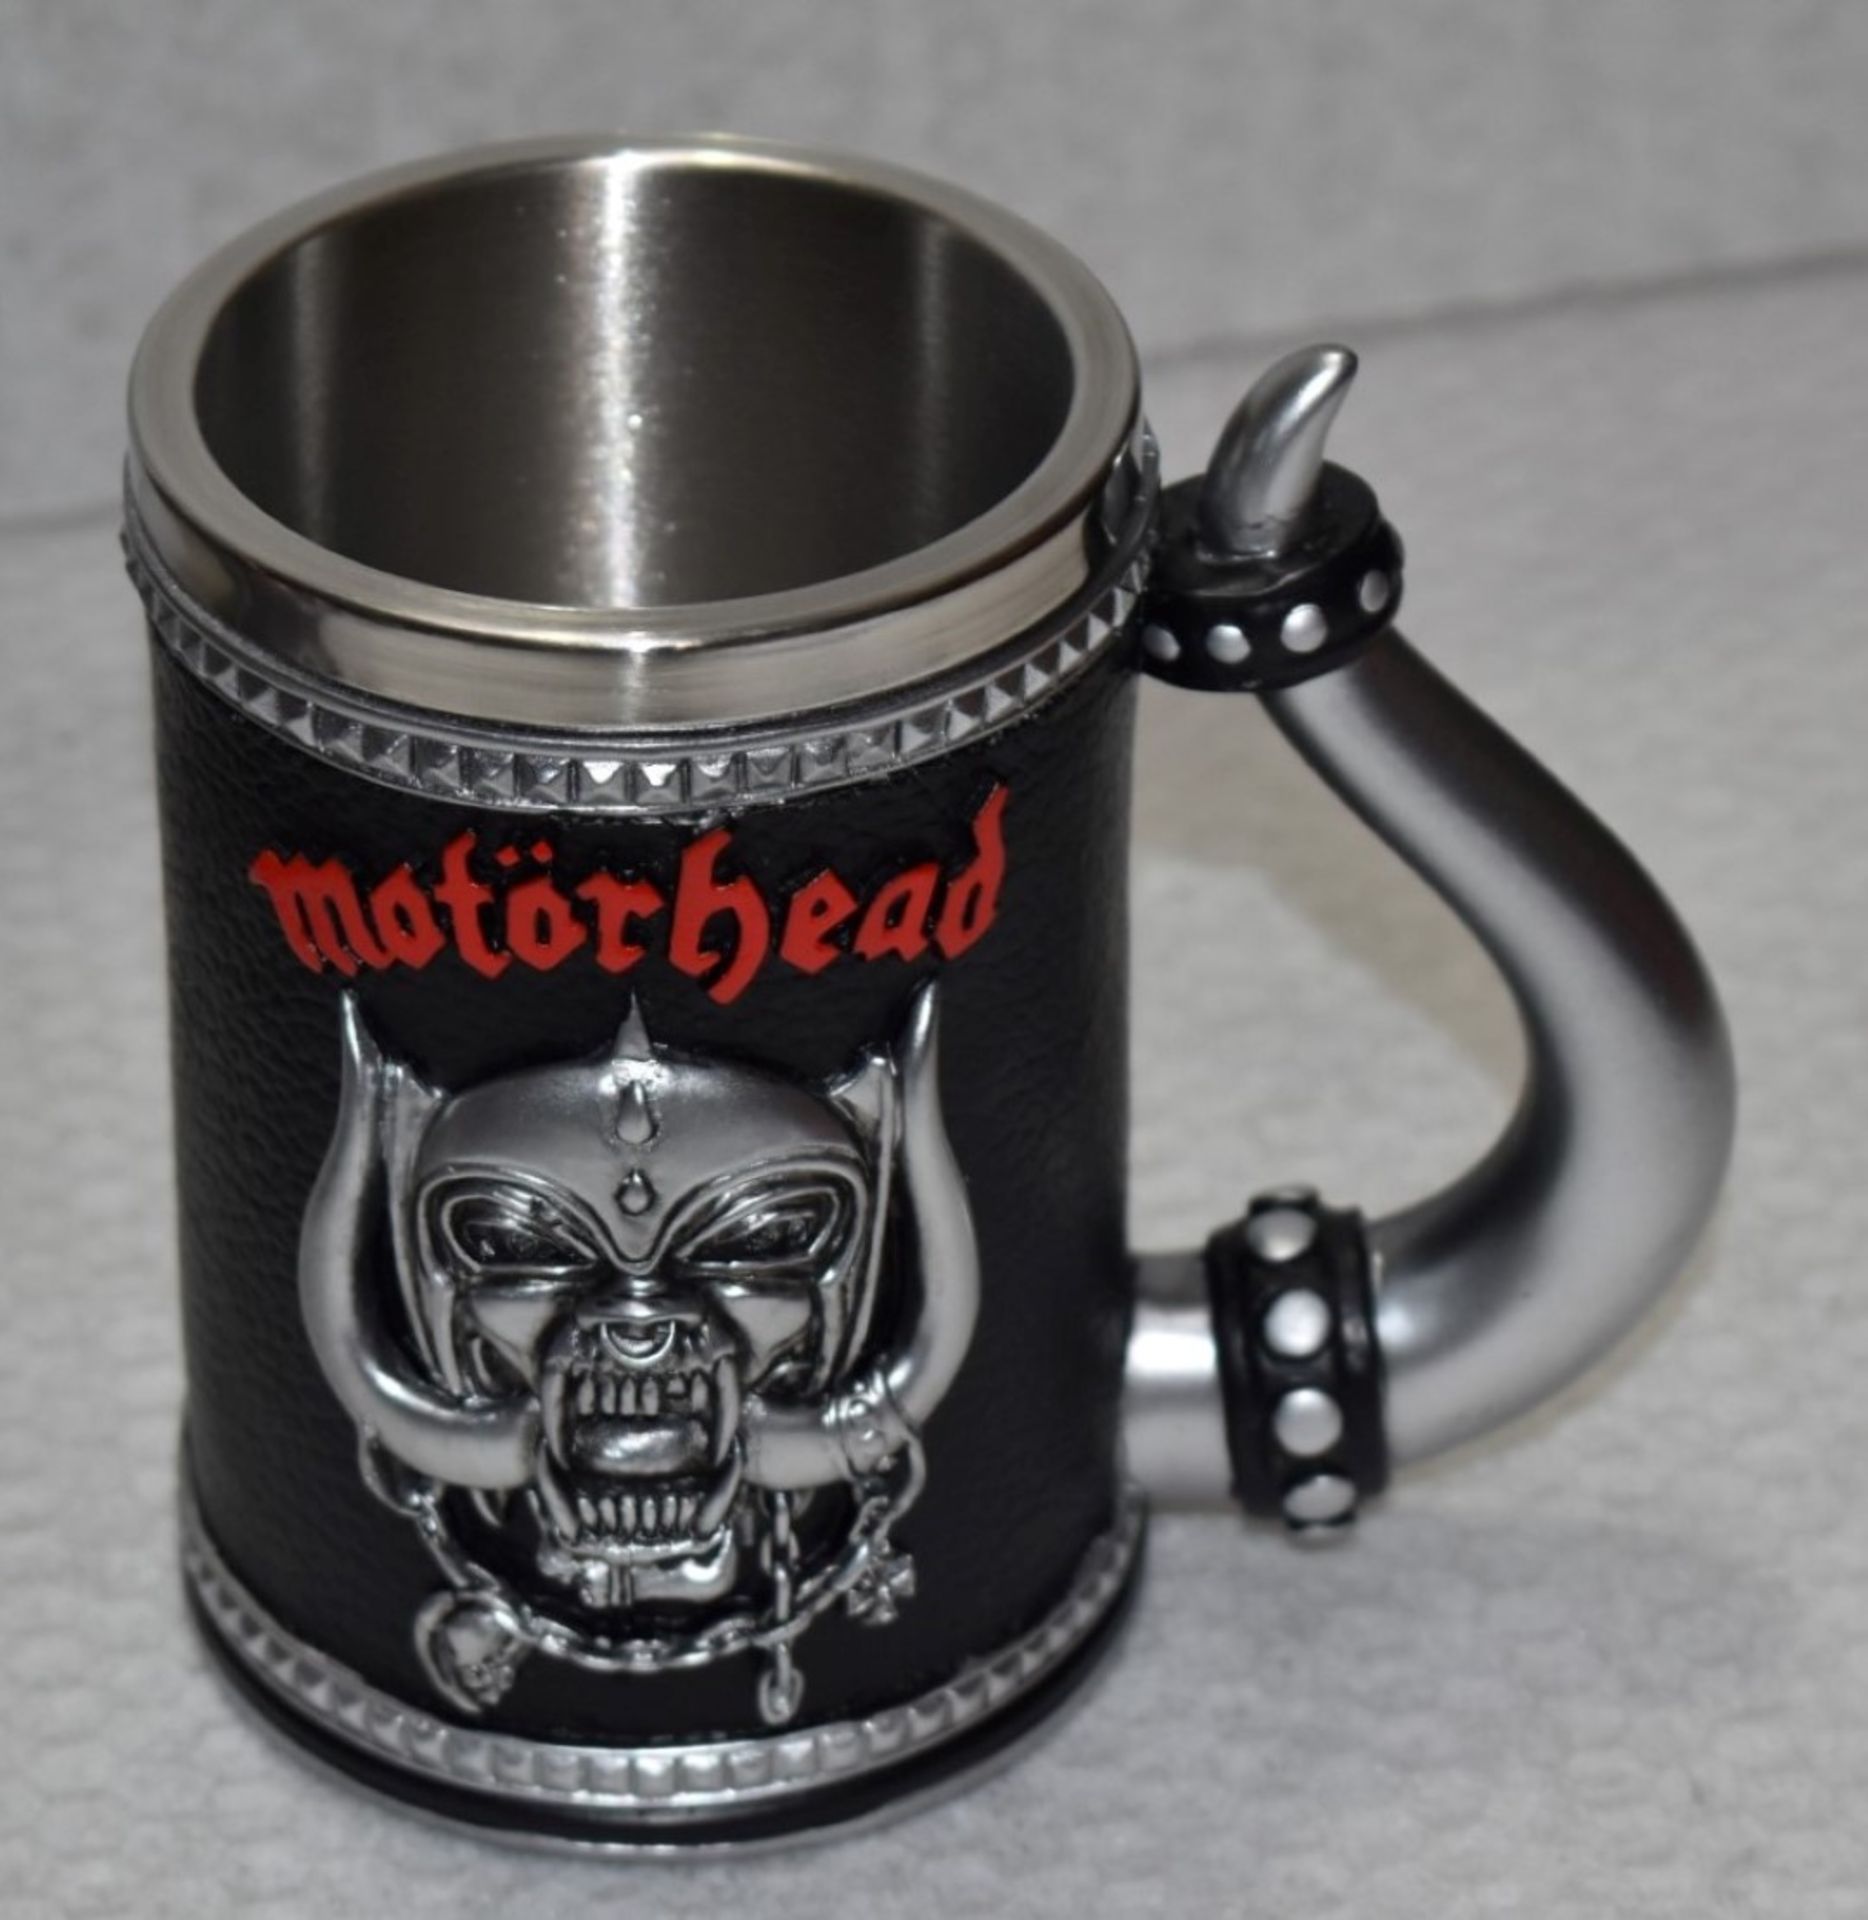 1 x Motorhead Drinks Tanker By Nemesis Now - Features Detailed Warpig Sculpture, Hand Painted - Image 9 of 11